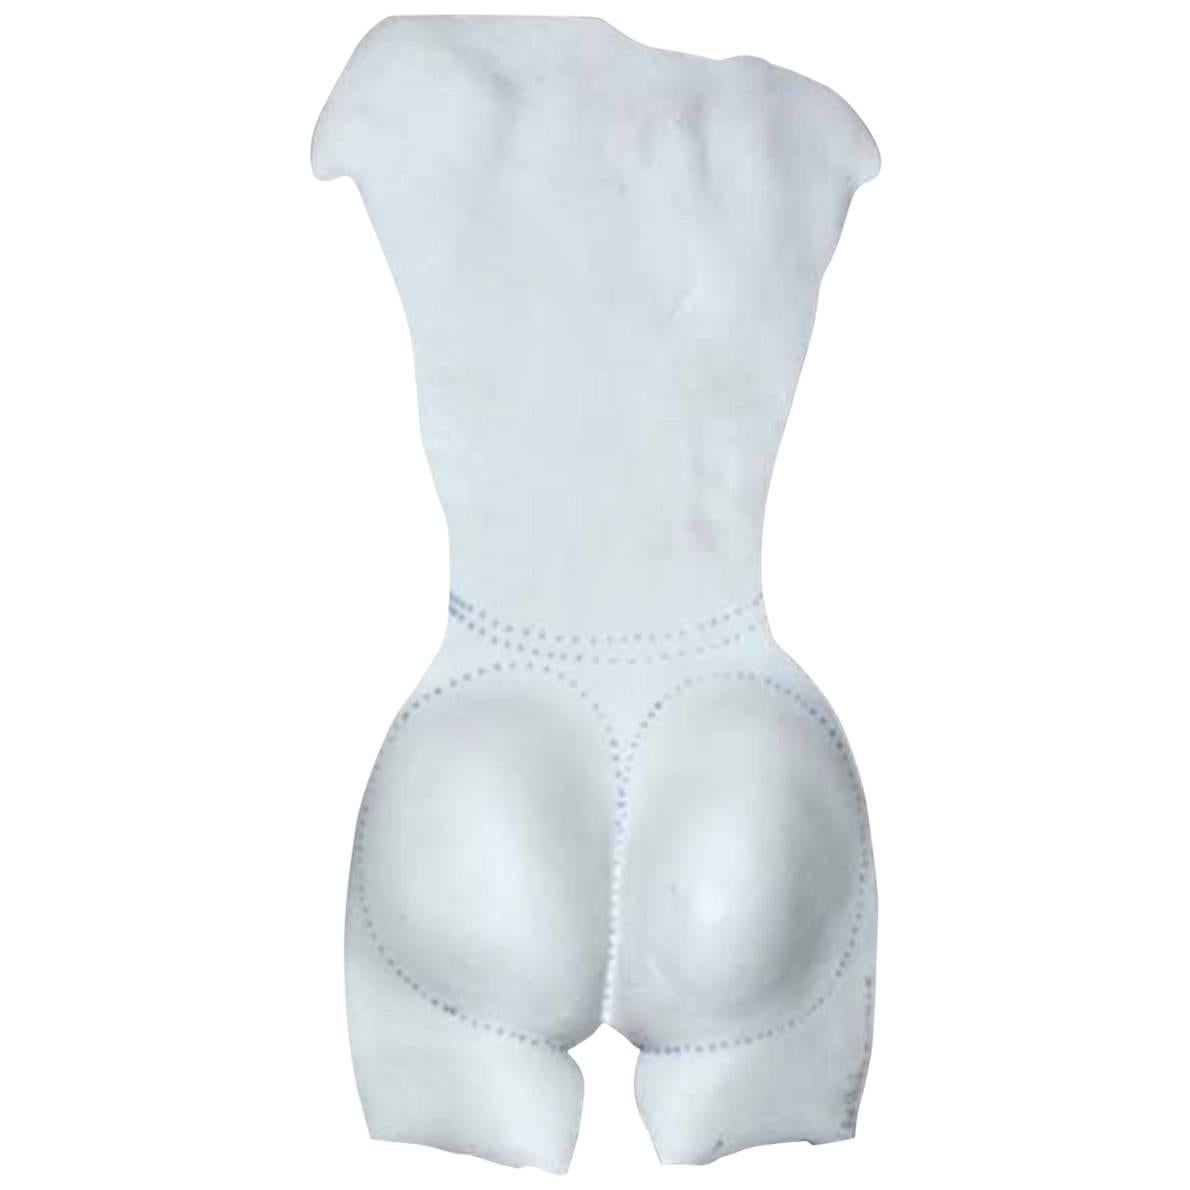 Female Nude Torso from the Back, White and Blue Porcelain, 2004 For Sale